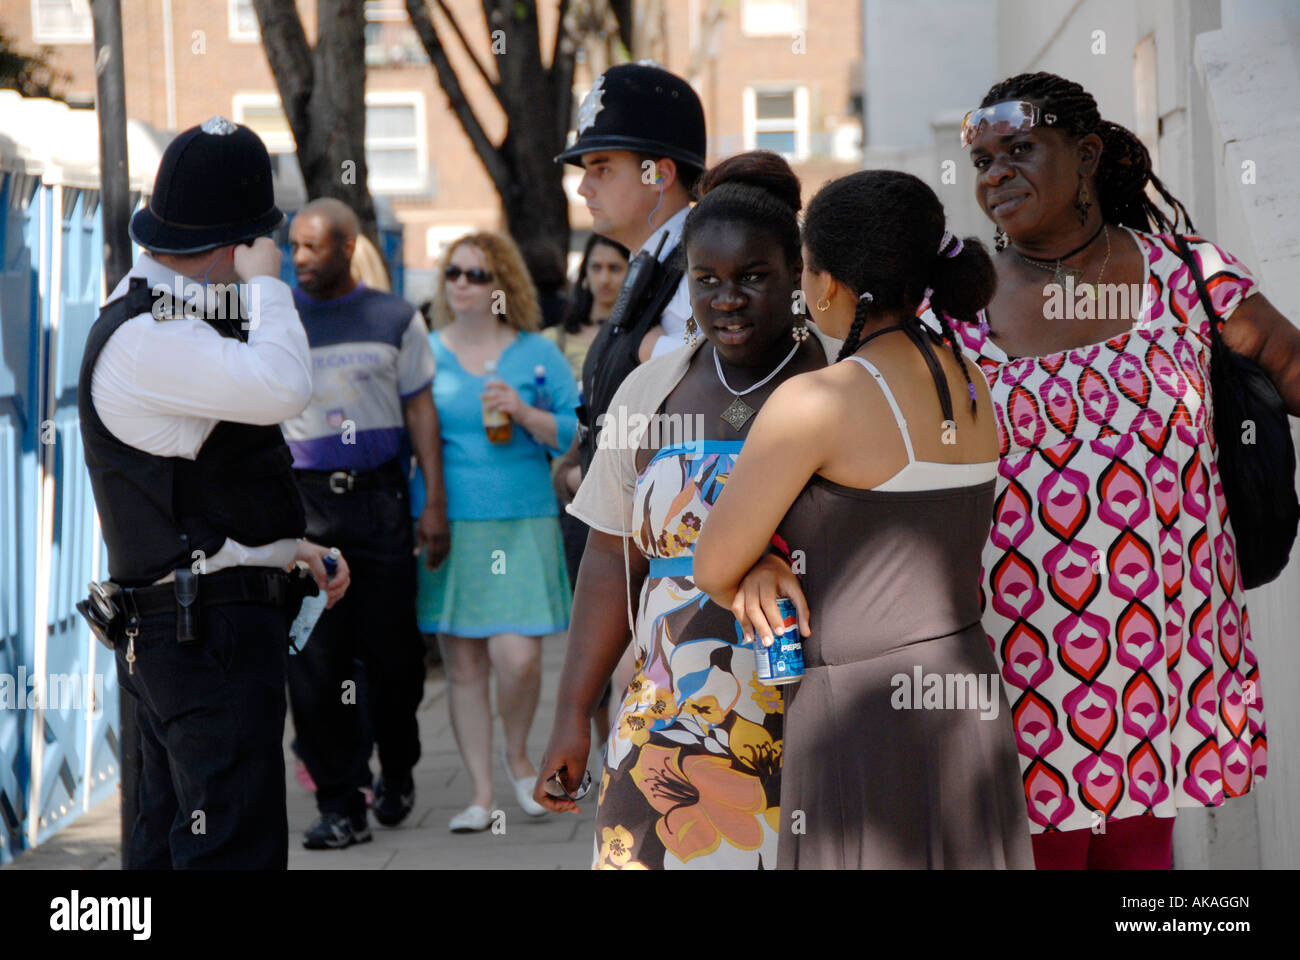 Group of women chatting on street corner police behind Stock Photo